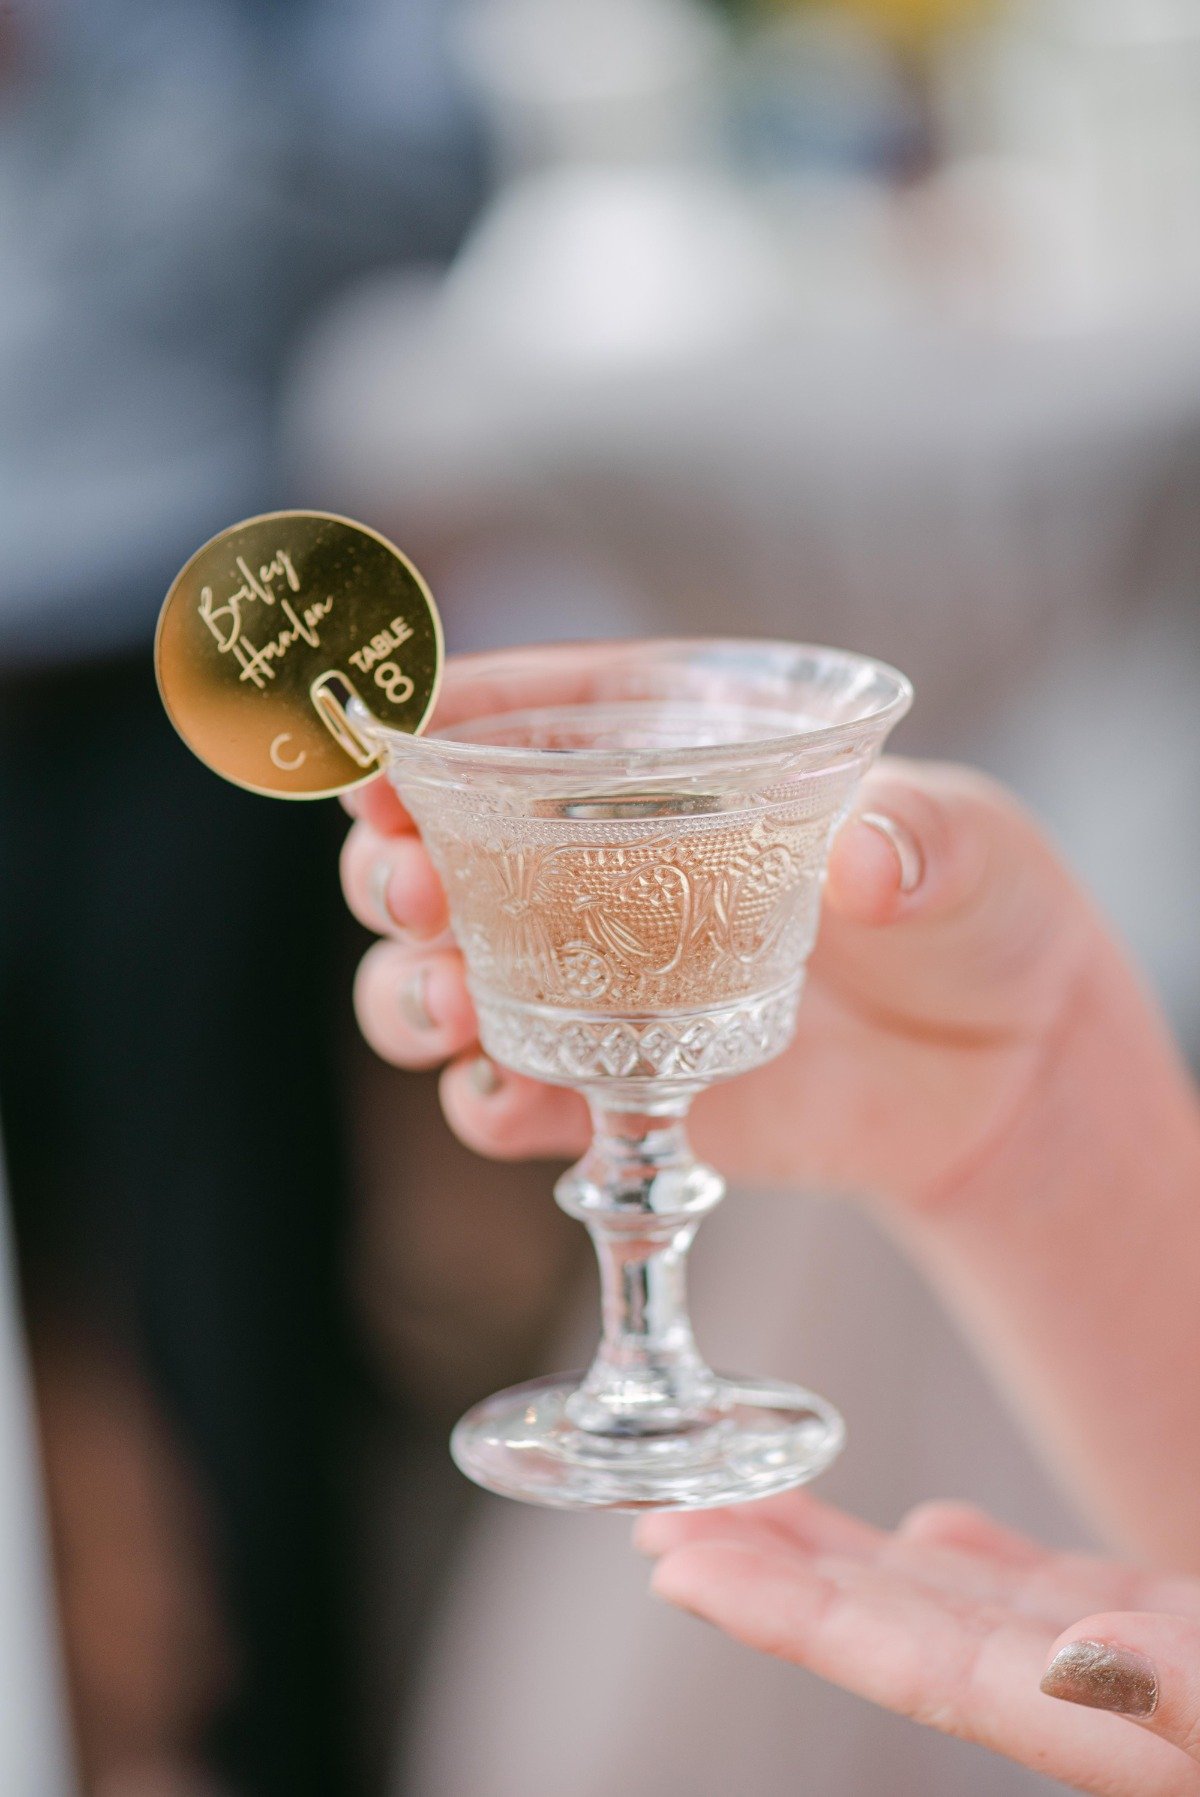 Vintage champagne glass held in air with personalized rim ornament